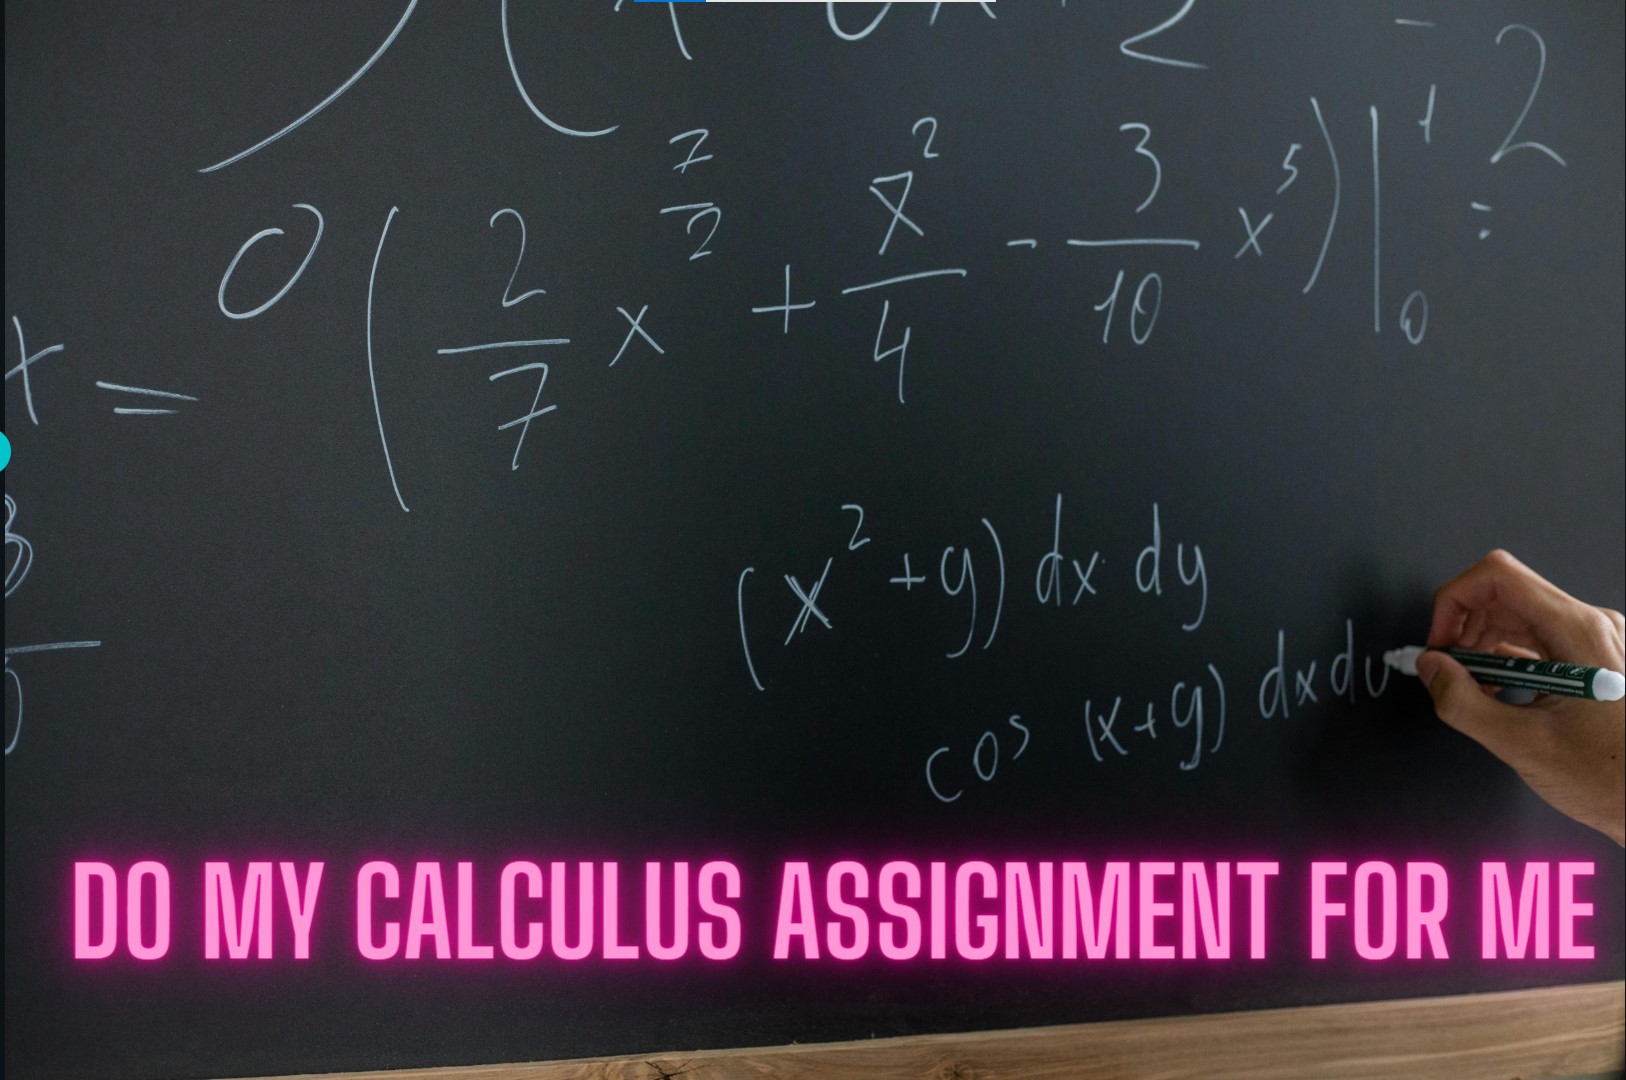 Calculus assignments help